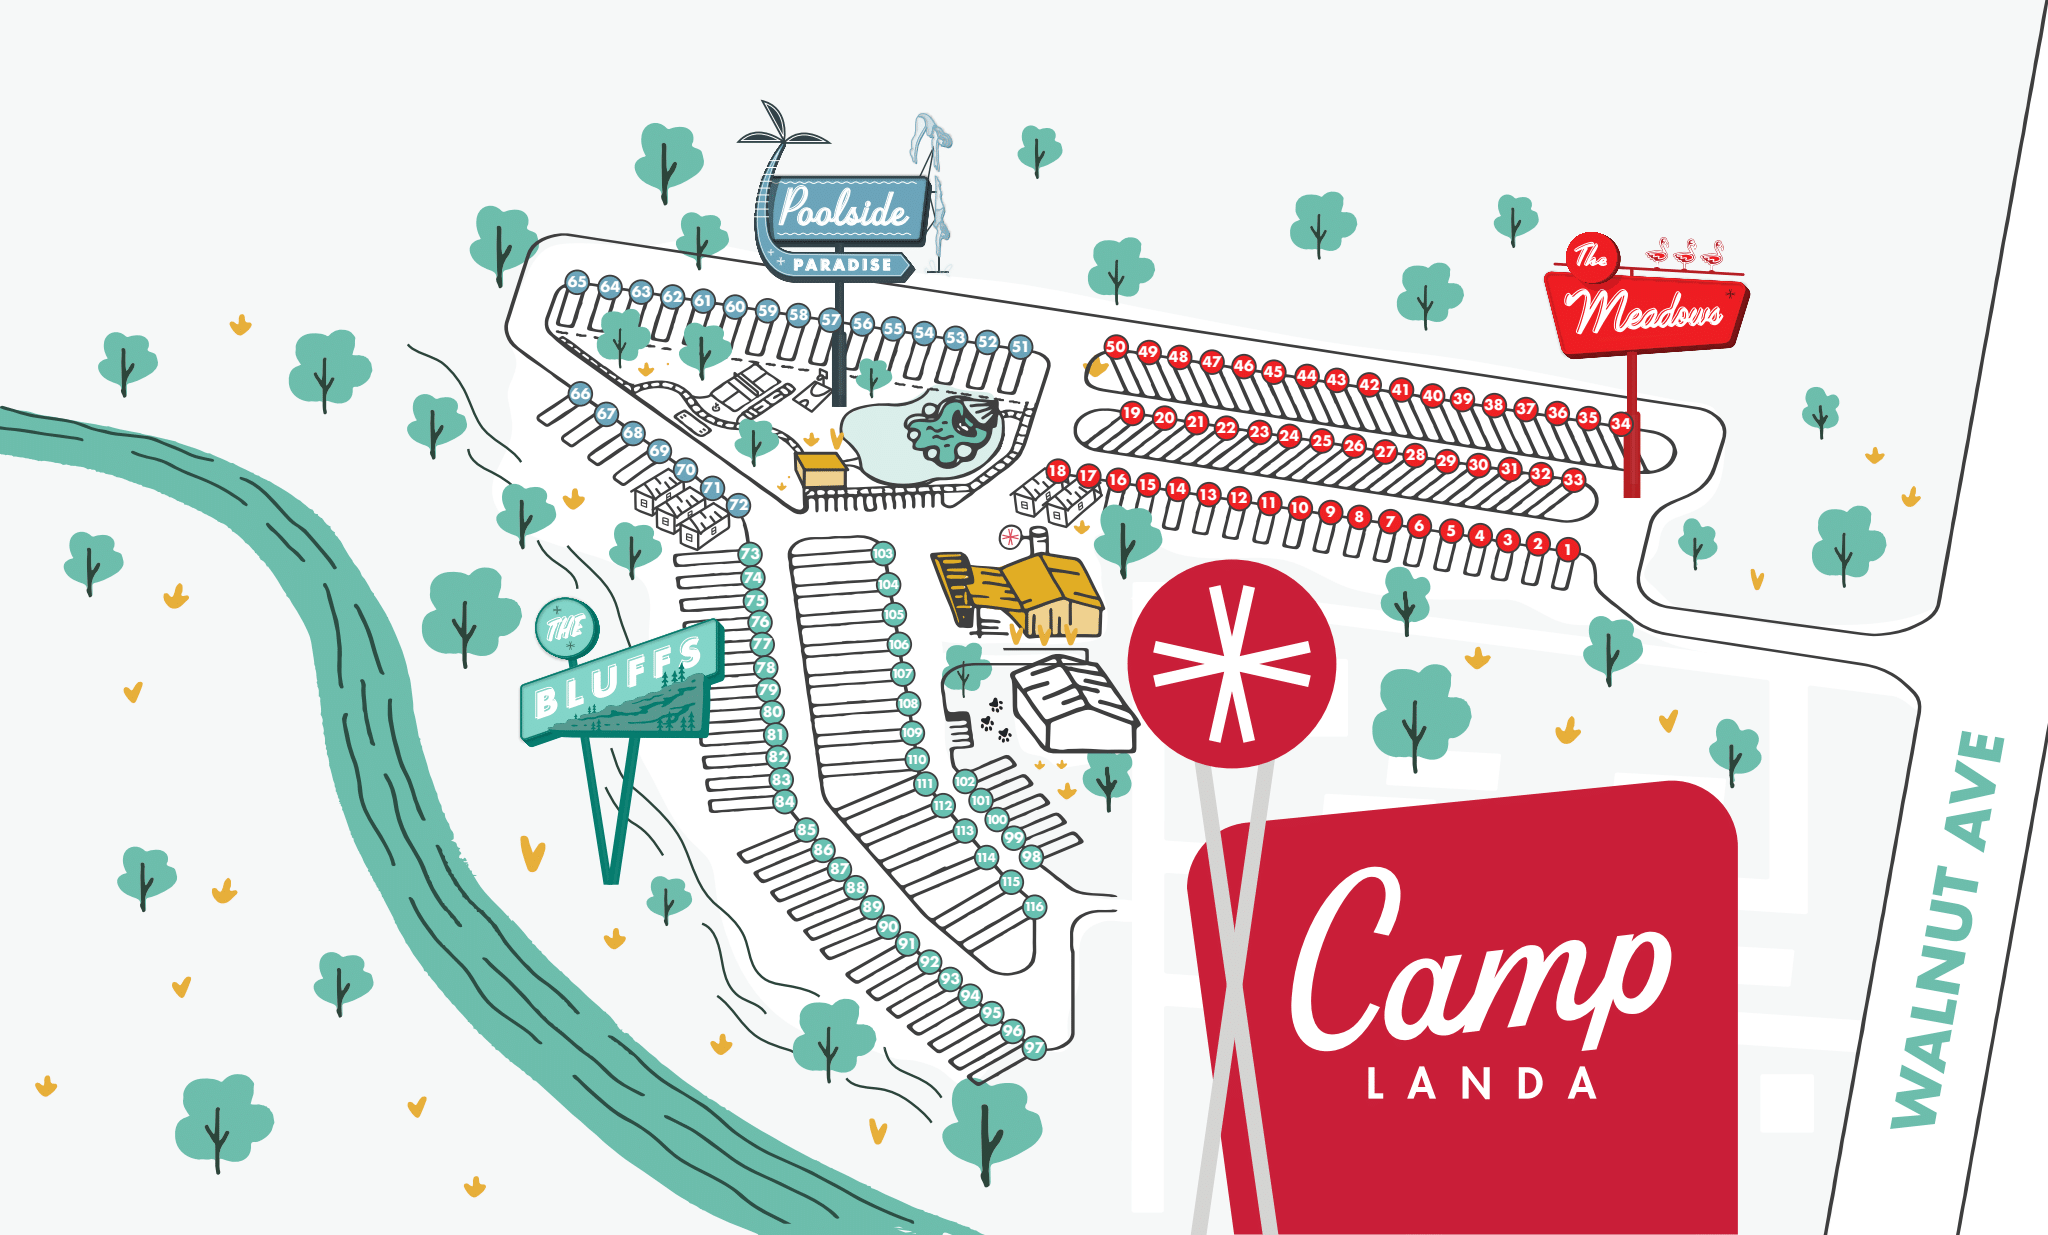 Camper submitted image from Camp Landa Resort - 5